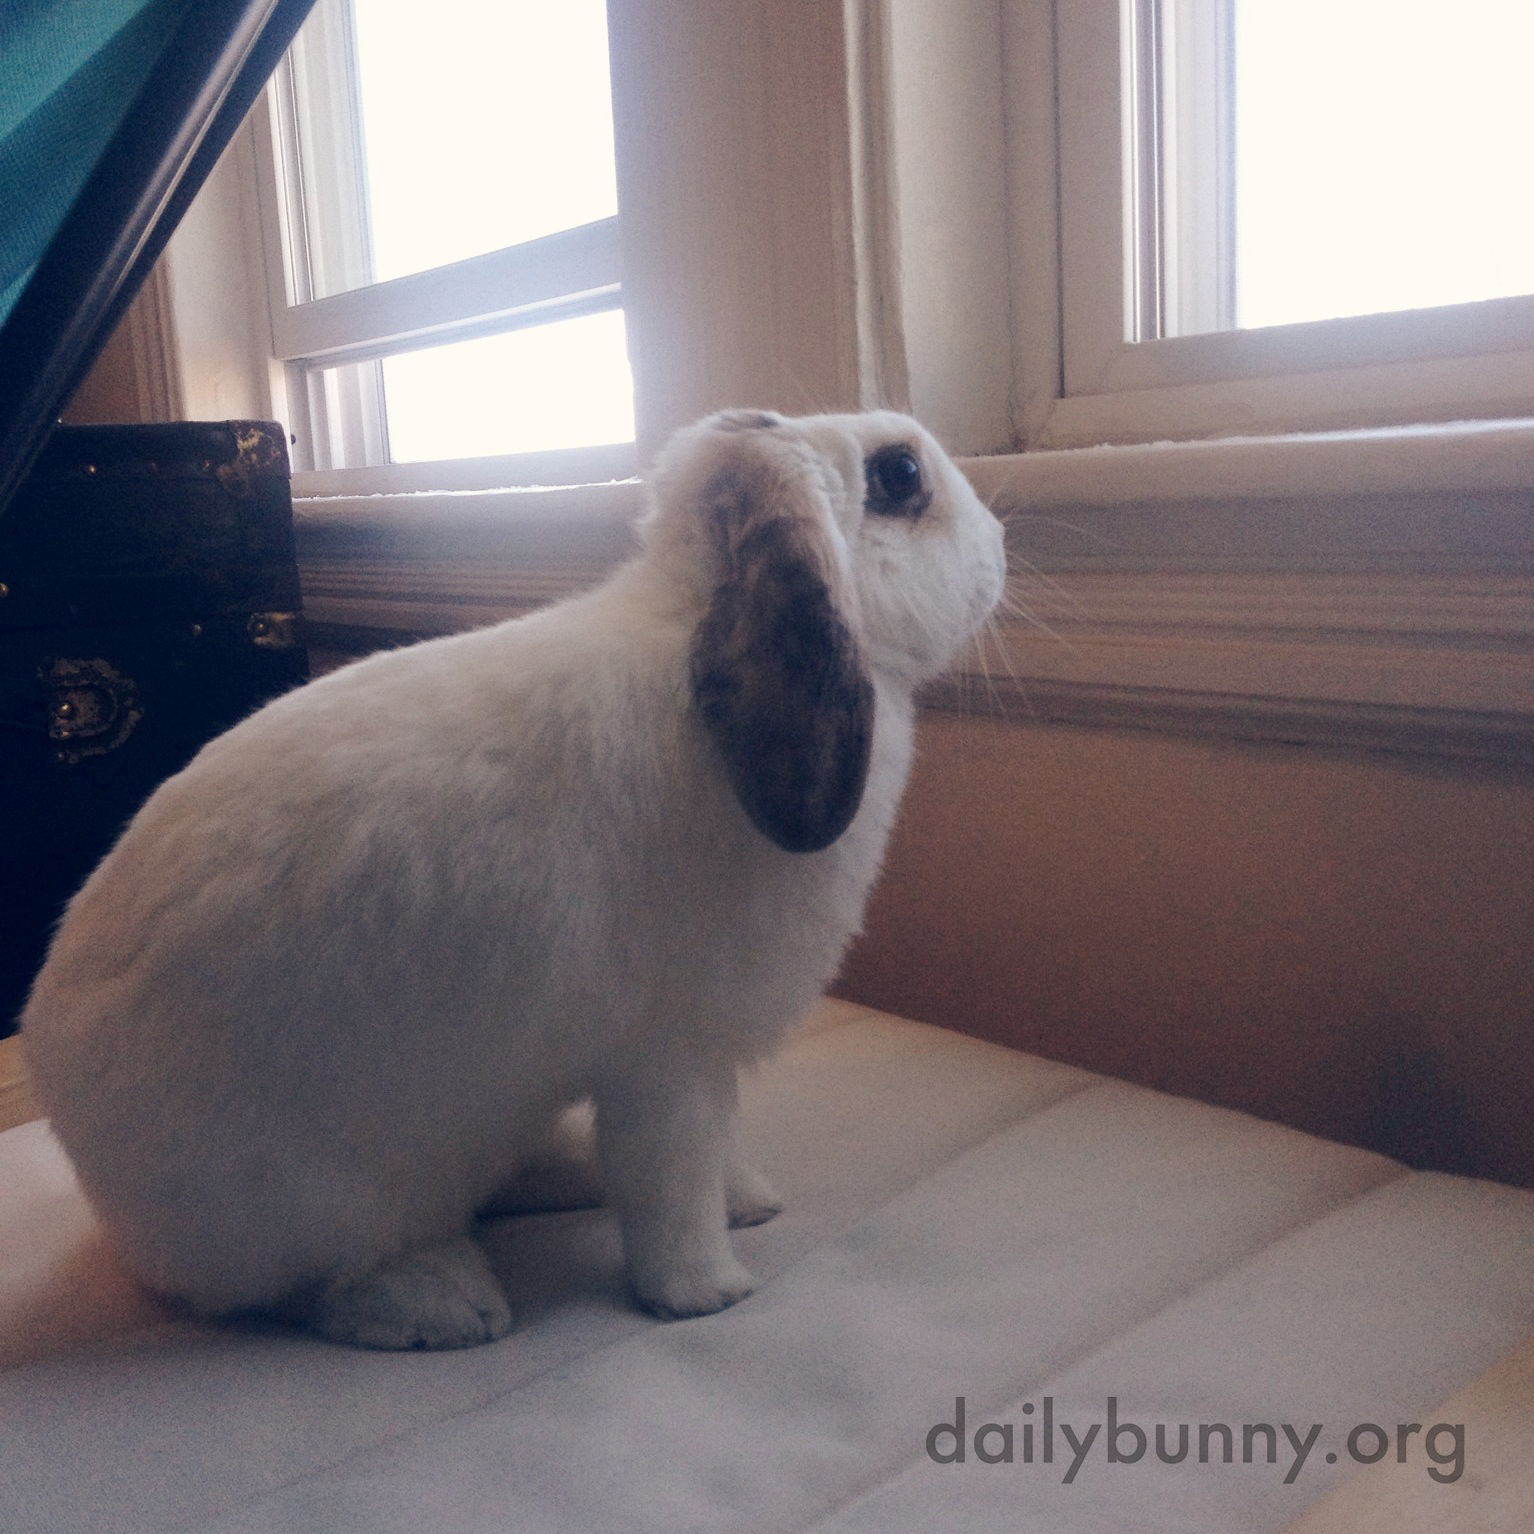 Bunny Is Curious About What's on the Other Side of the Window 1